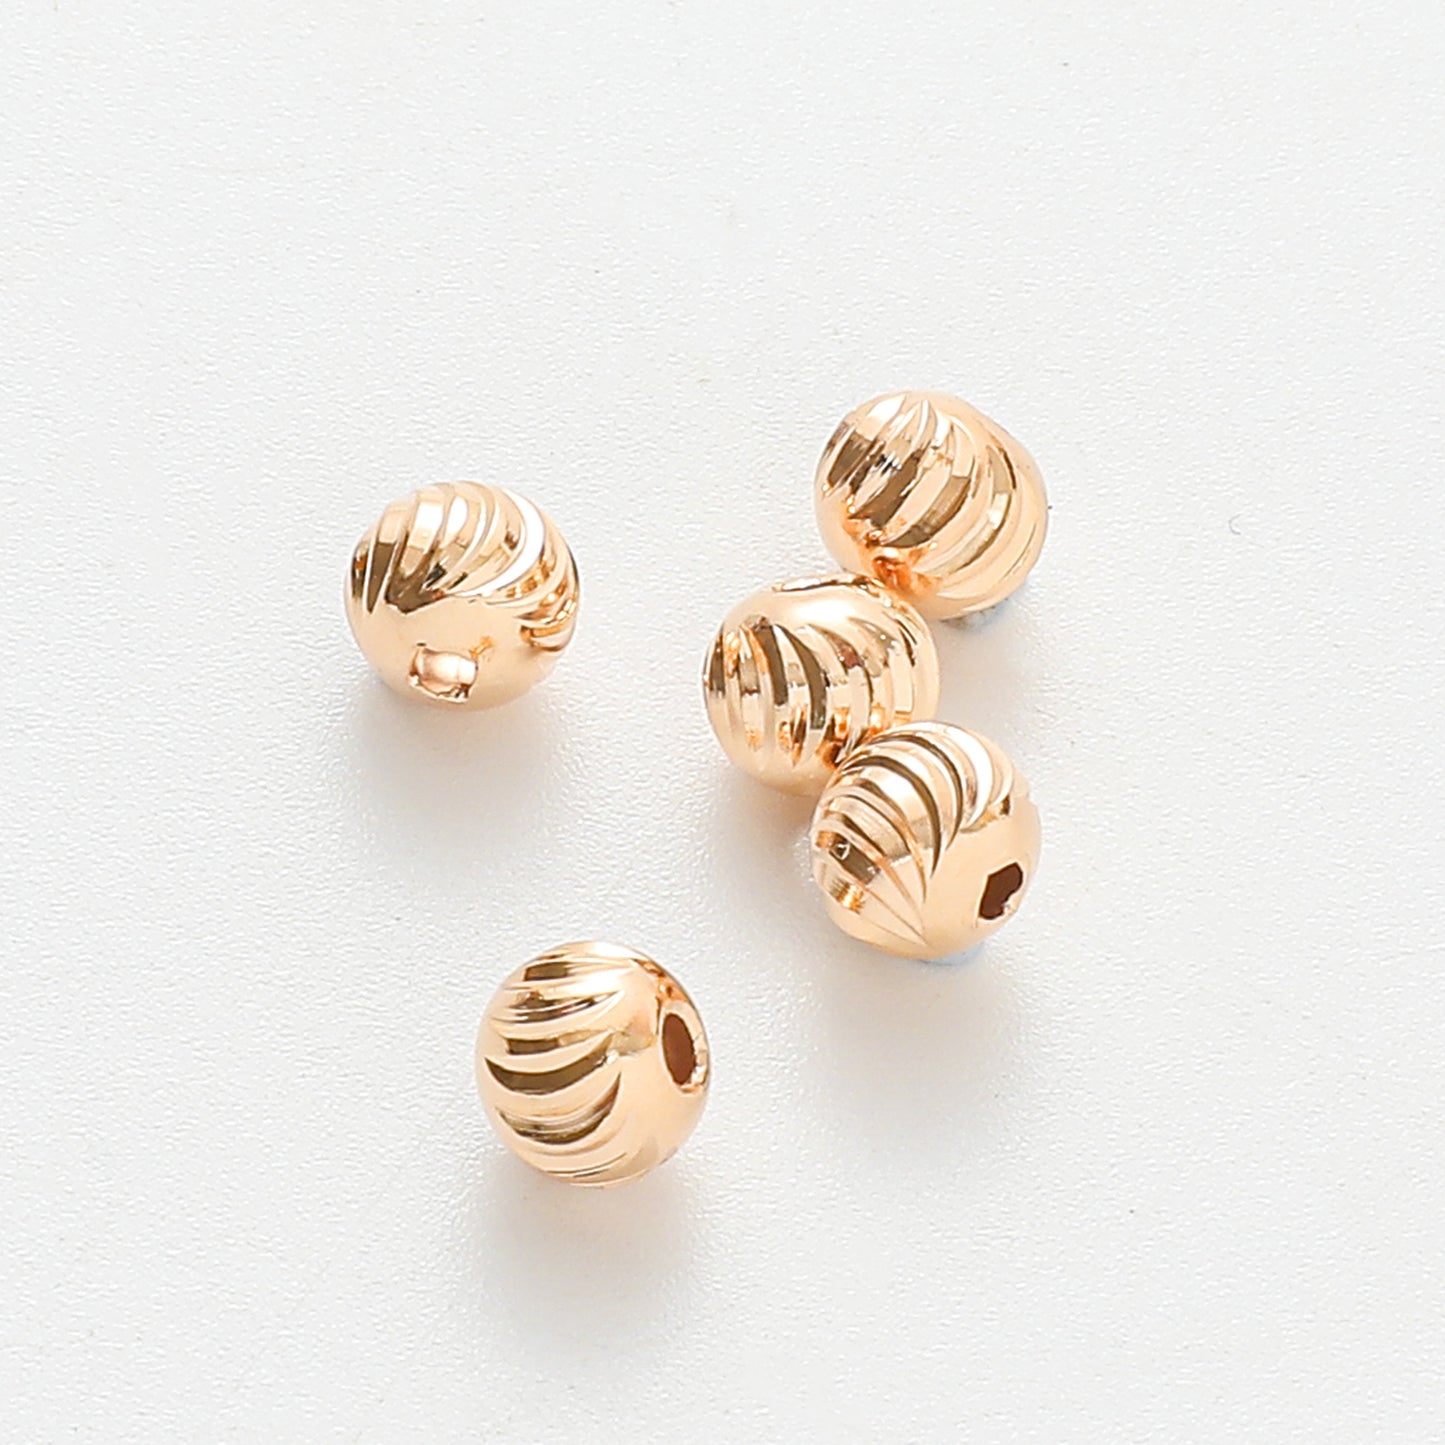 Gold Filled Water proof/Tarnish resistant watermelon Cut Round Beads Jewelry Findings